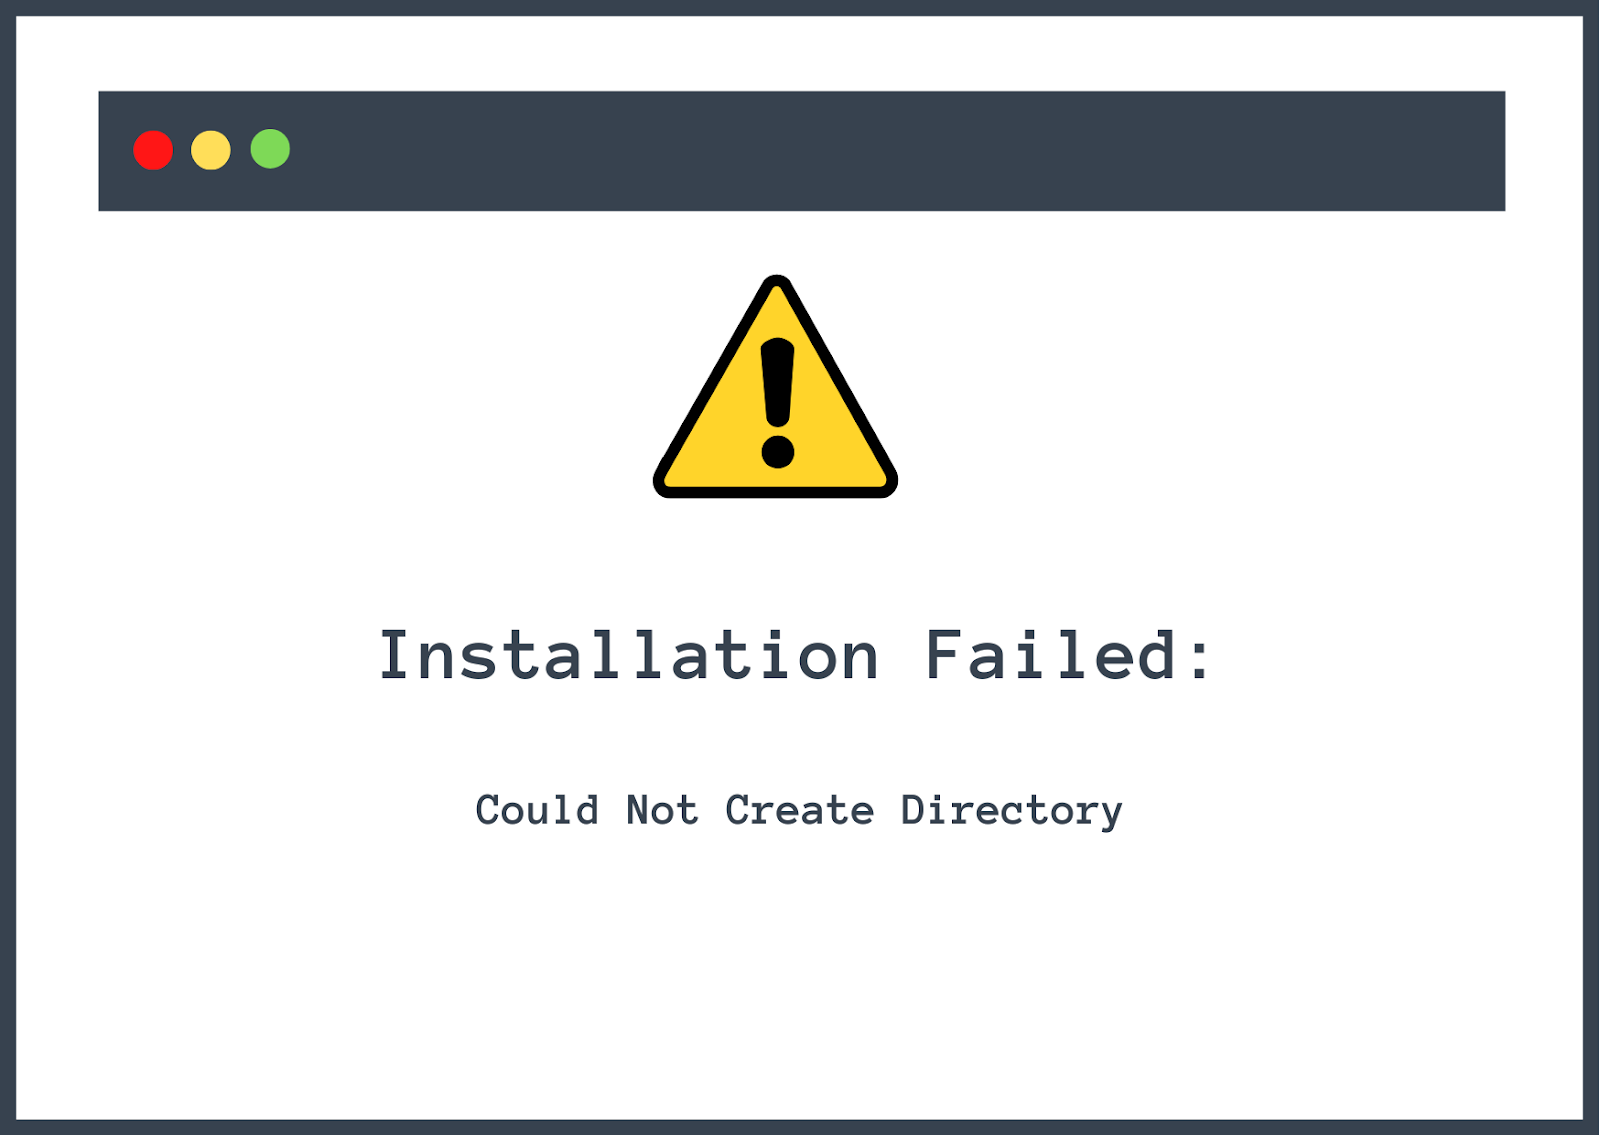 How to Fix “Installation Failed: Could Not Create Directory” Error on WordPress (2023 Guide)